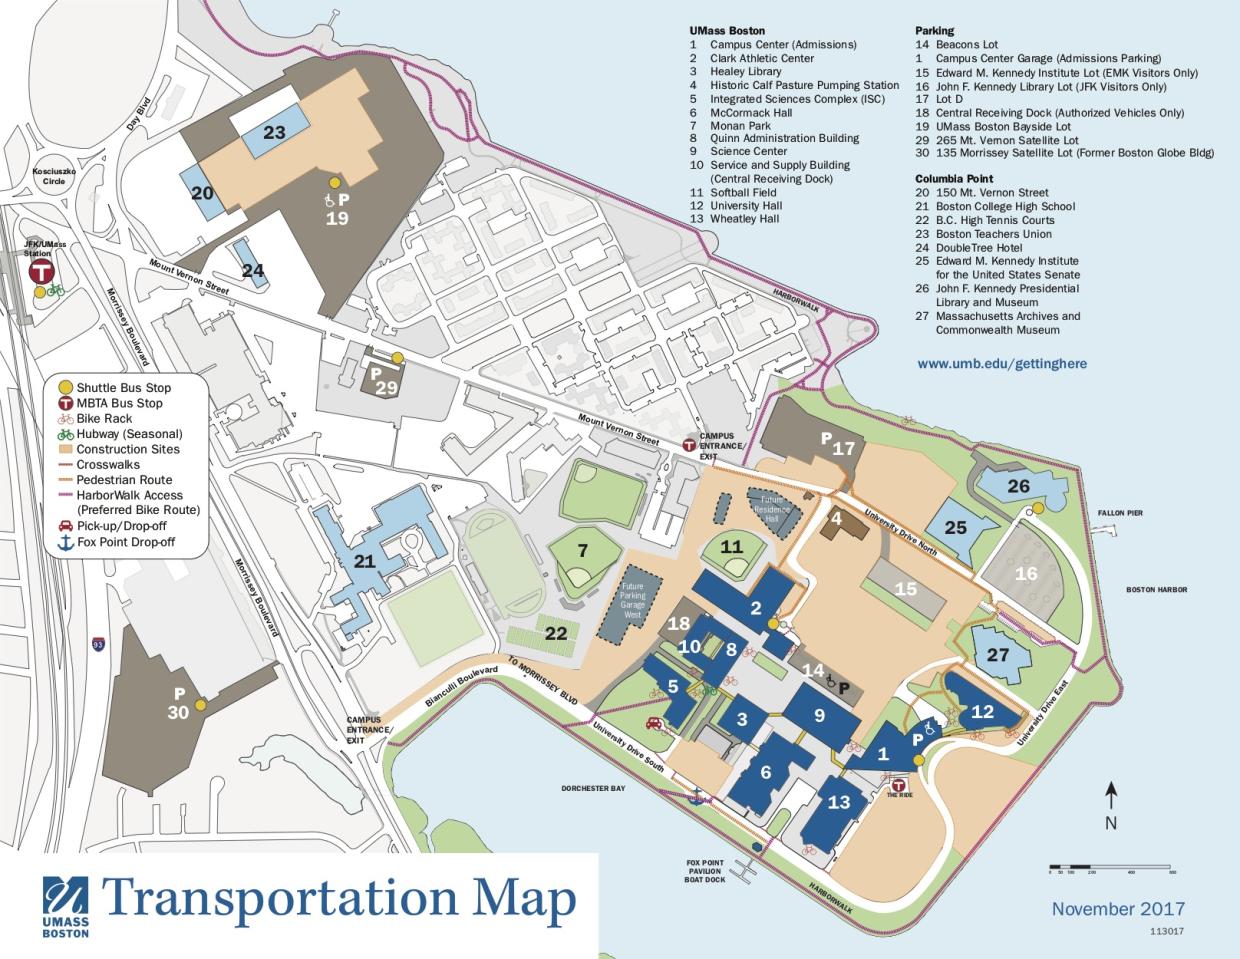 Map of the UMass Boston Campus